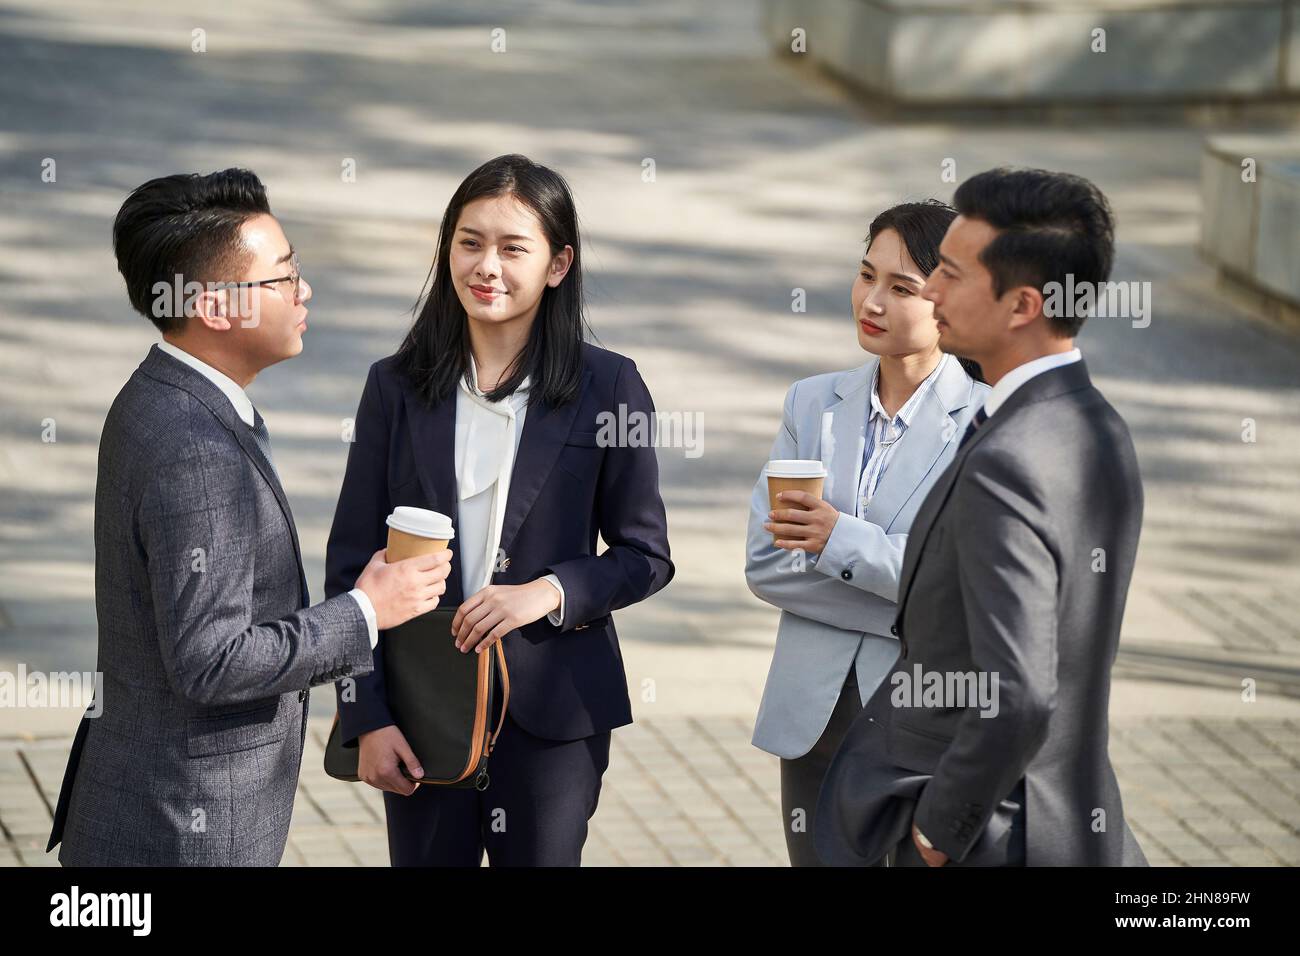 group of four young asian business people standing chatting outdoors on street Stock Photo